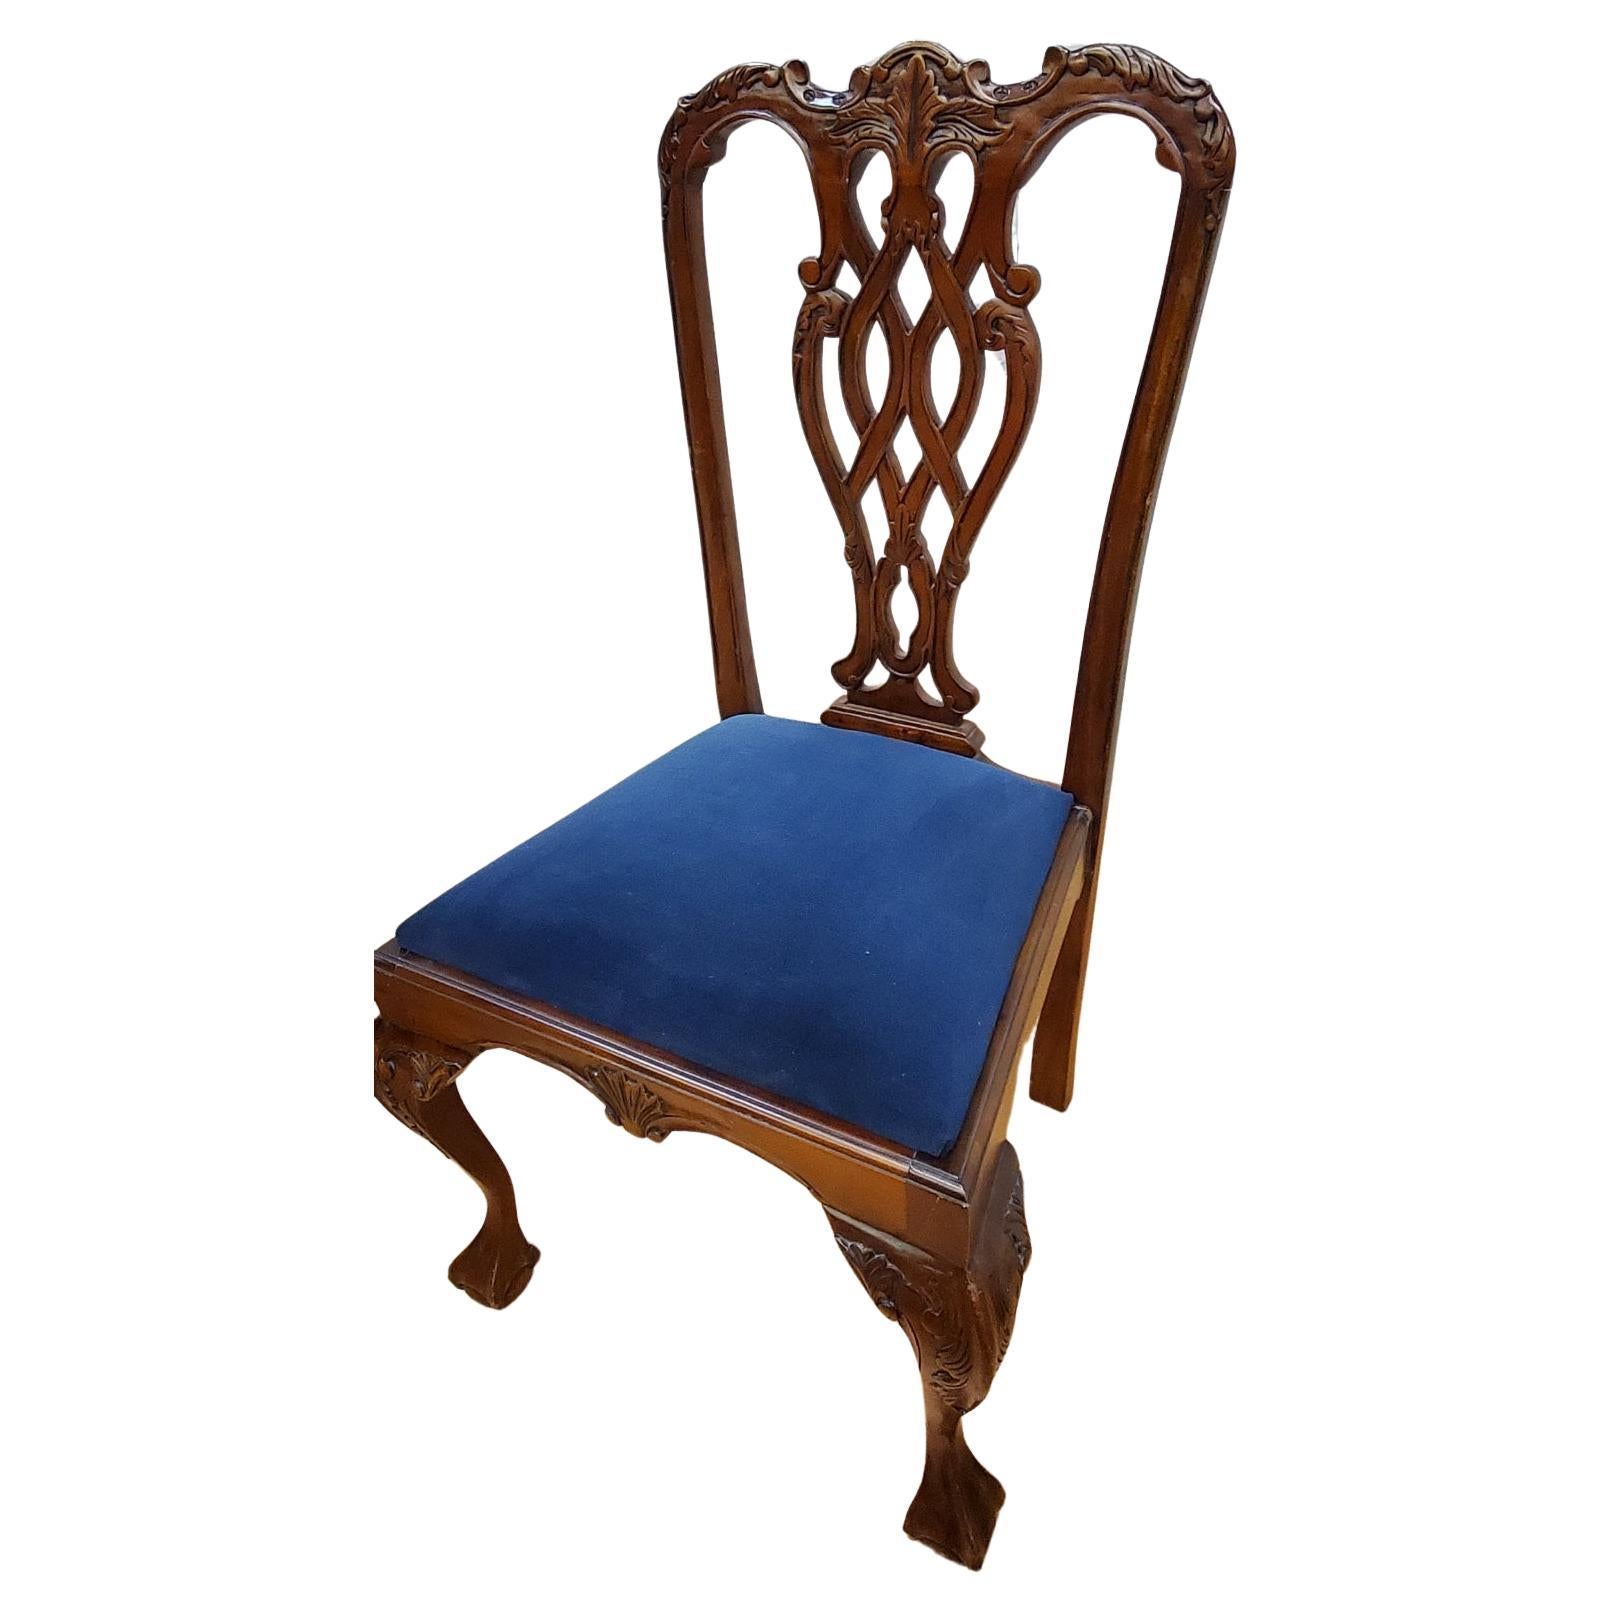 Vintage Hand Carved Mahogany Chippendale Eagle Claw Dining Chairs - Set of 6

A beautiful vintage set of six solid mahogany Chippendale dining chairs with ornate carvings all around. Consists of four side chairs and two armchairs with ball and claw